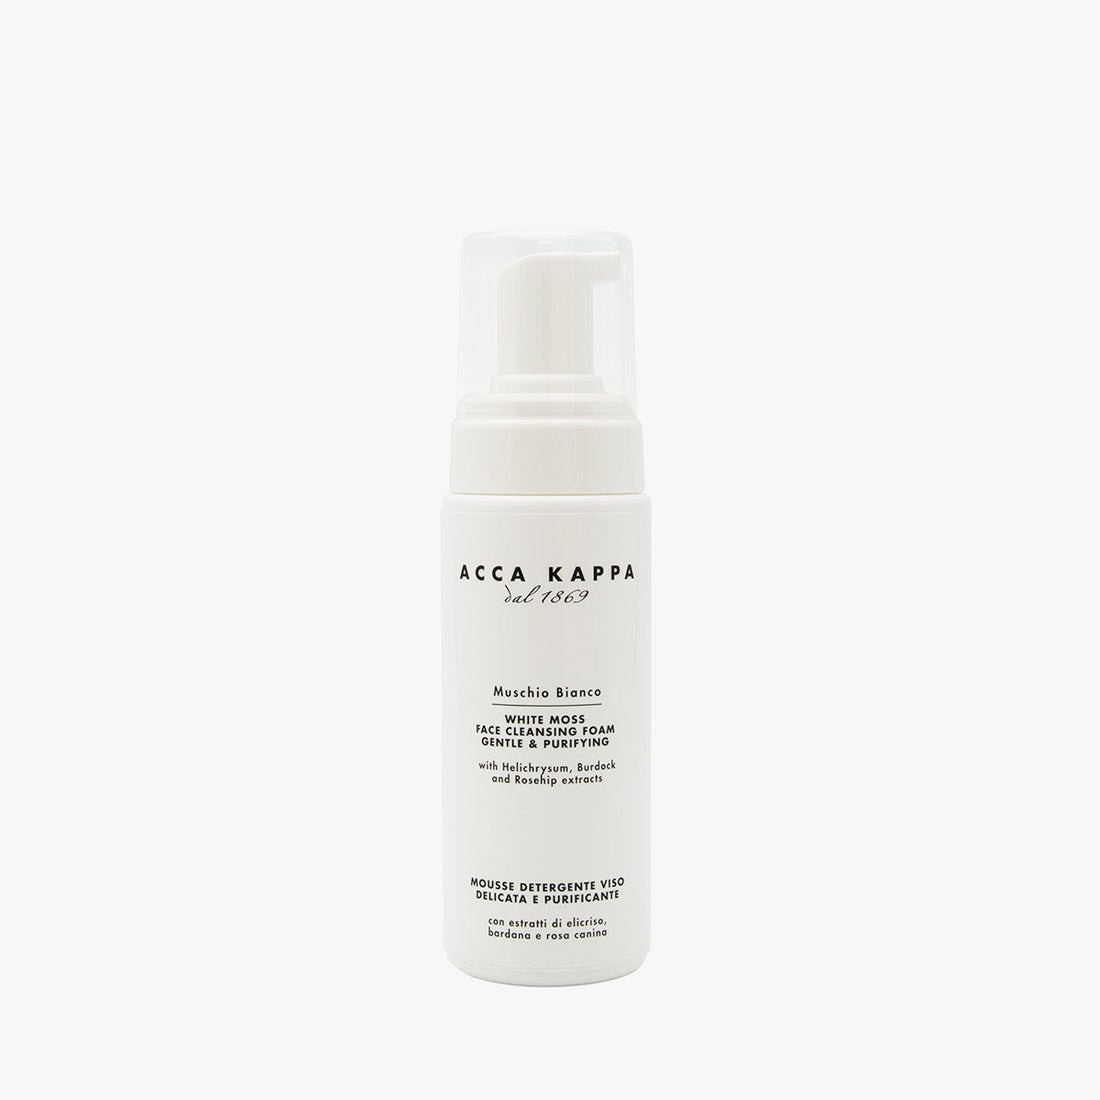 ACCA KAPPA White Moss Face Cleanser